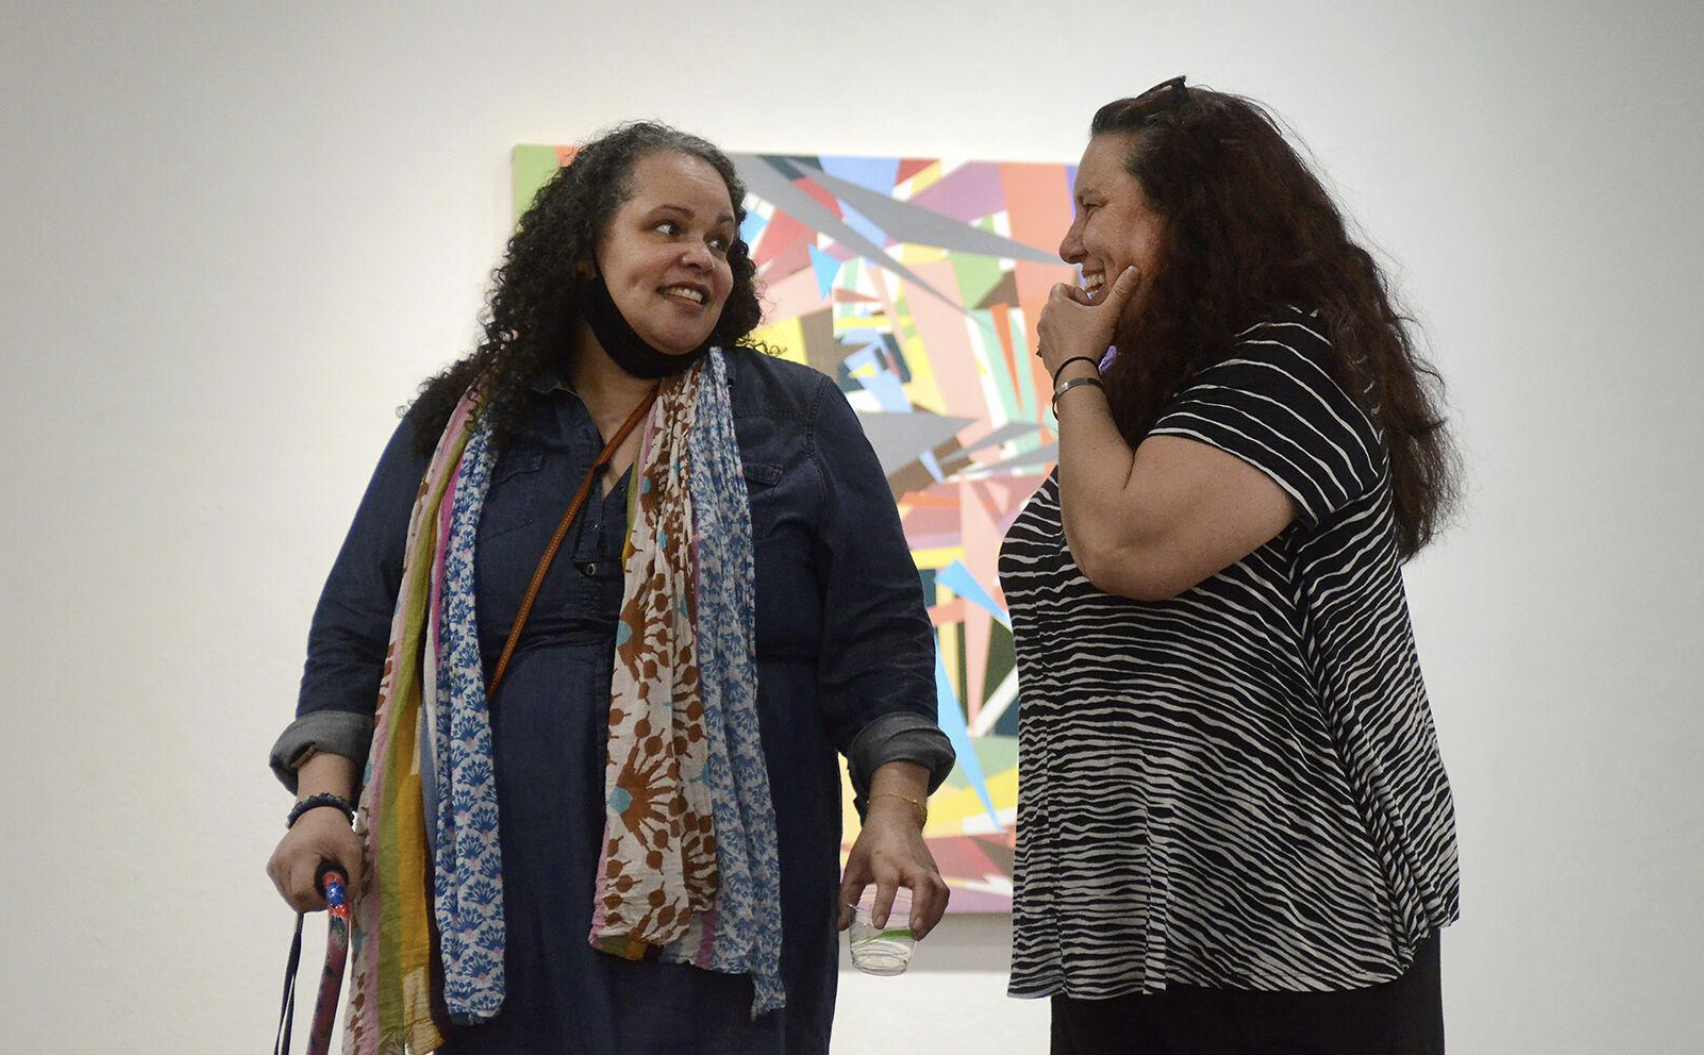 Jessica Thornton, left, and Catherine Armbrust introduce themselves and the gallery to people attending the reception